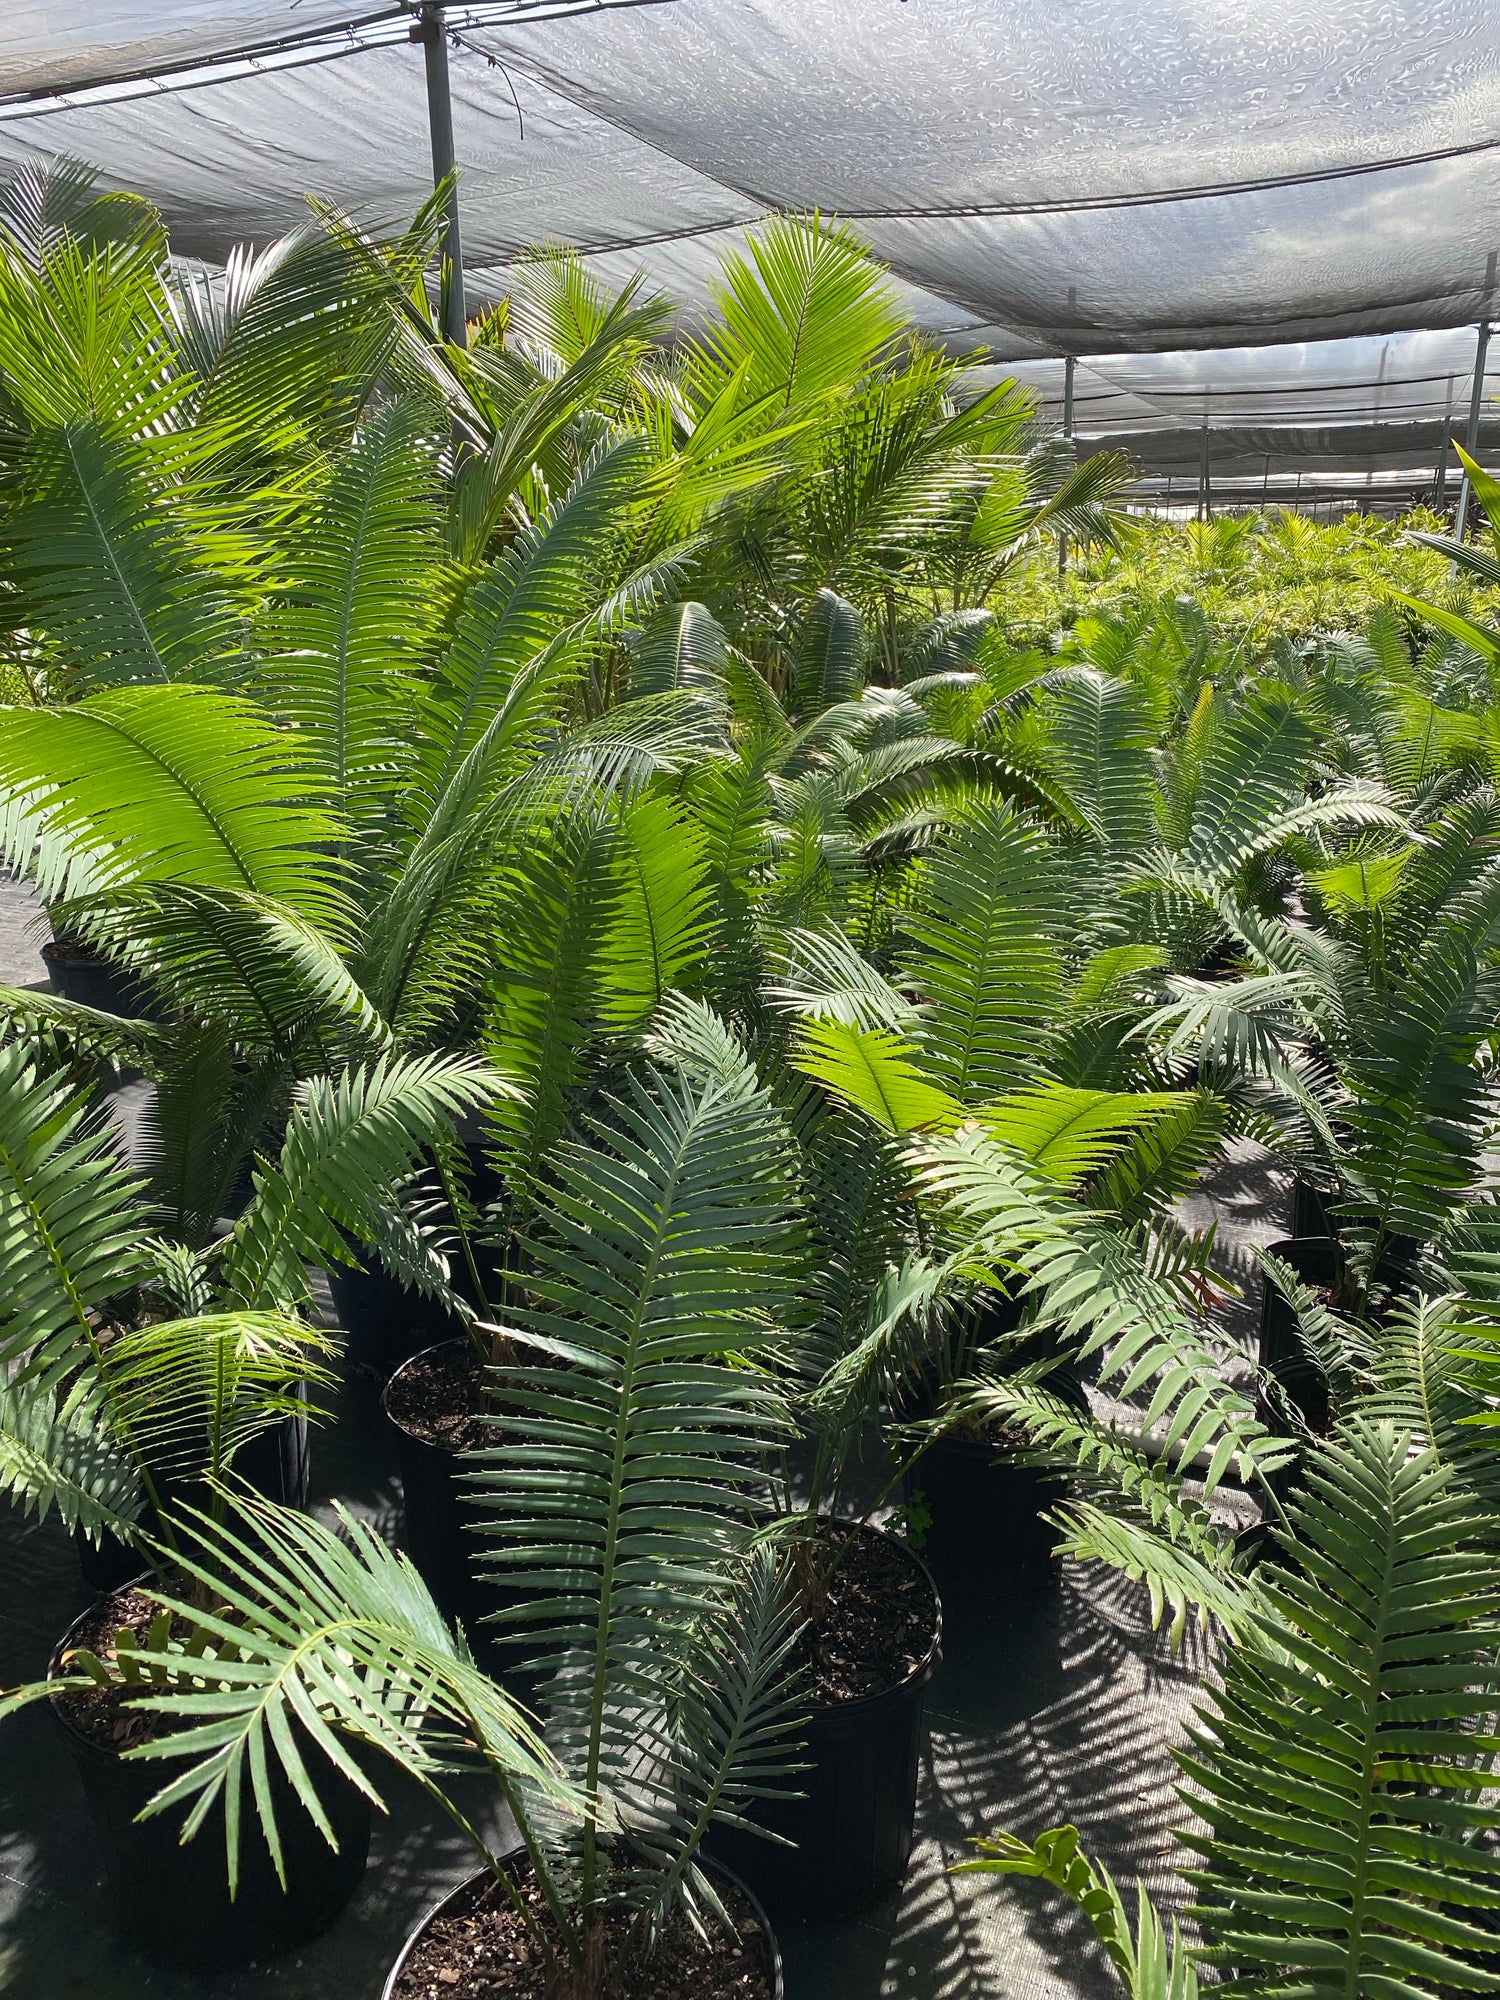 Dioon Spinulosum, Mexican Cycad, Gum Exotic Palm